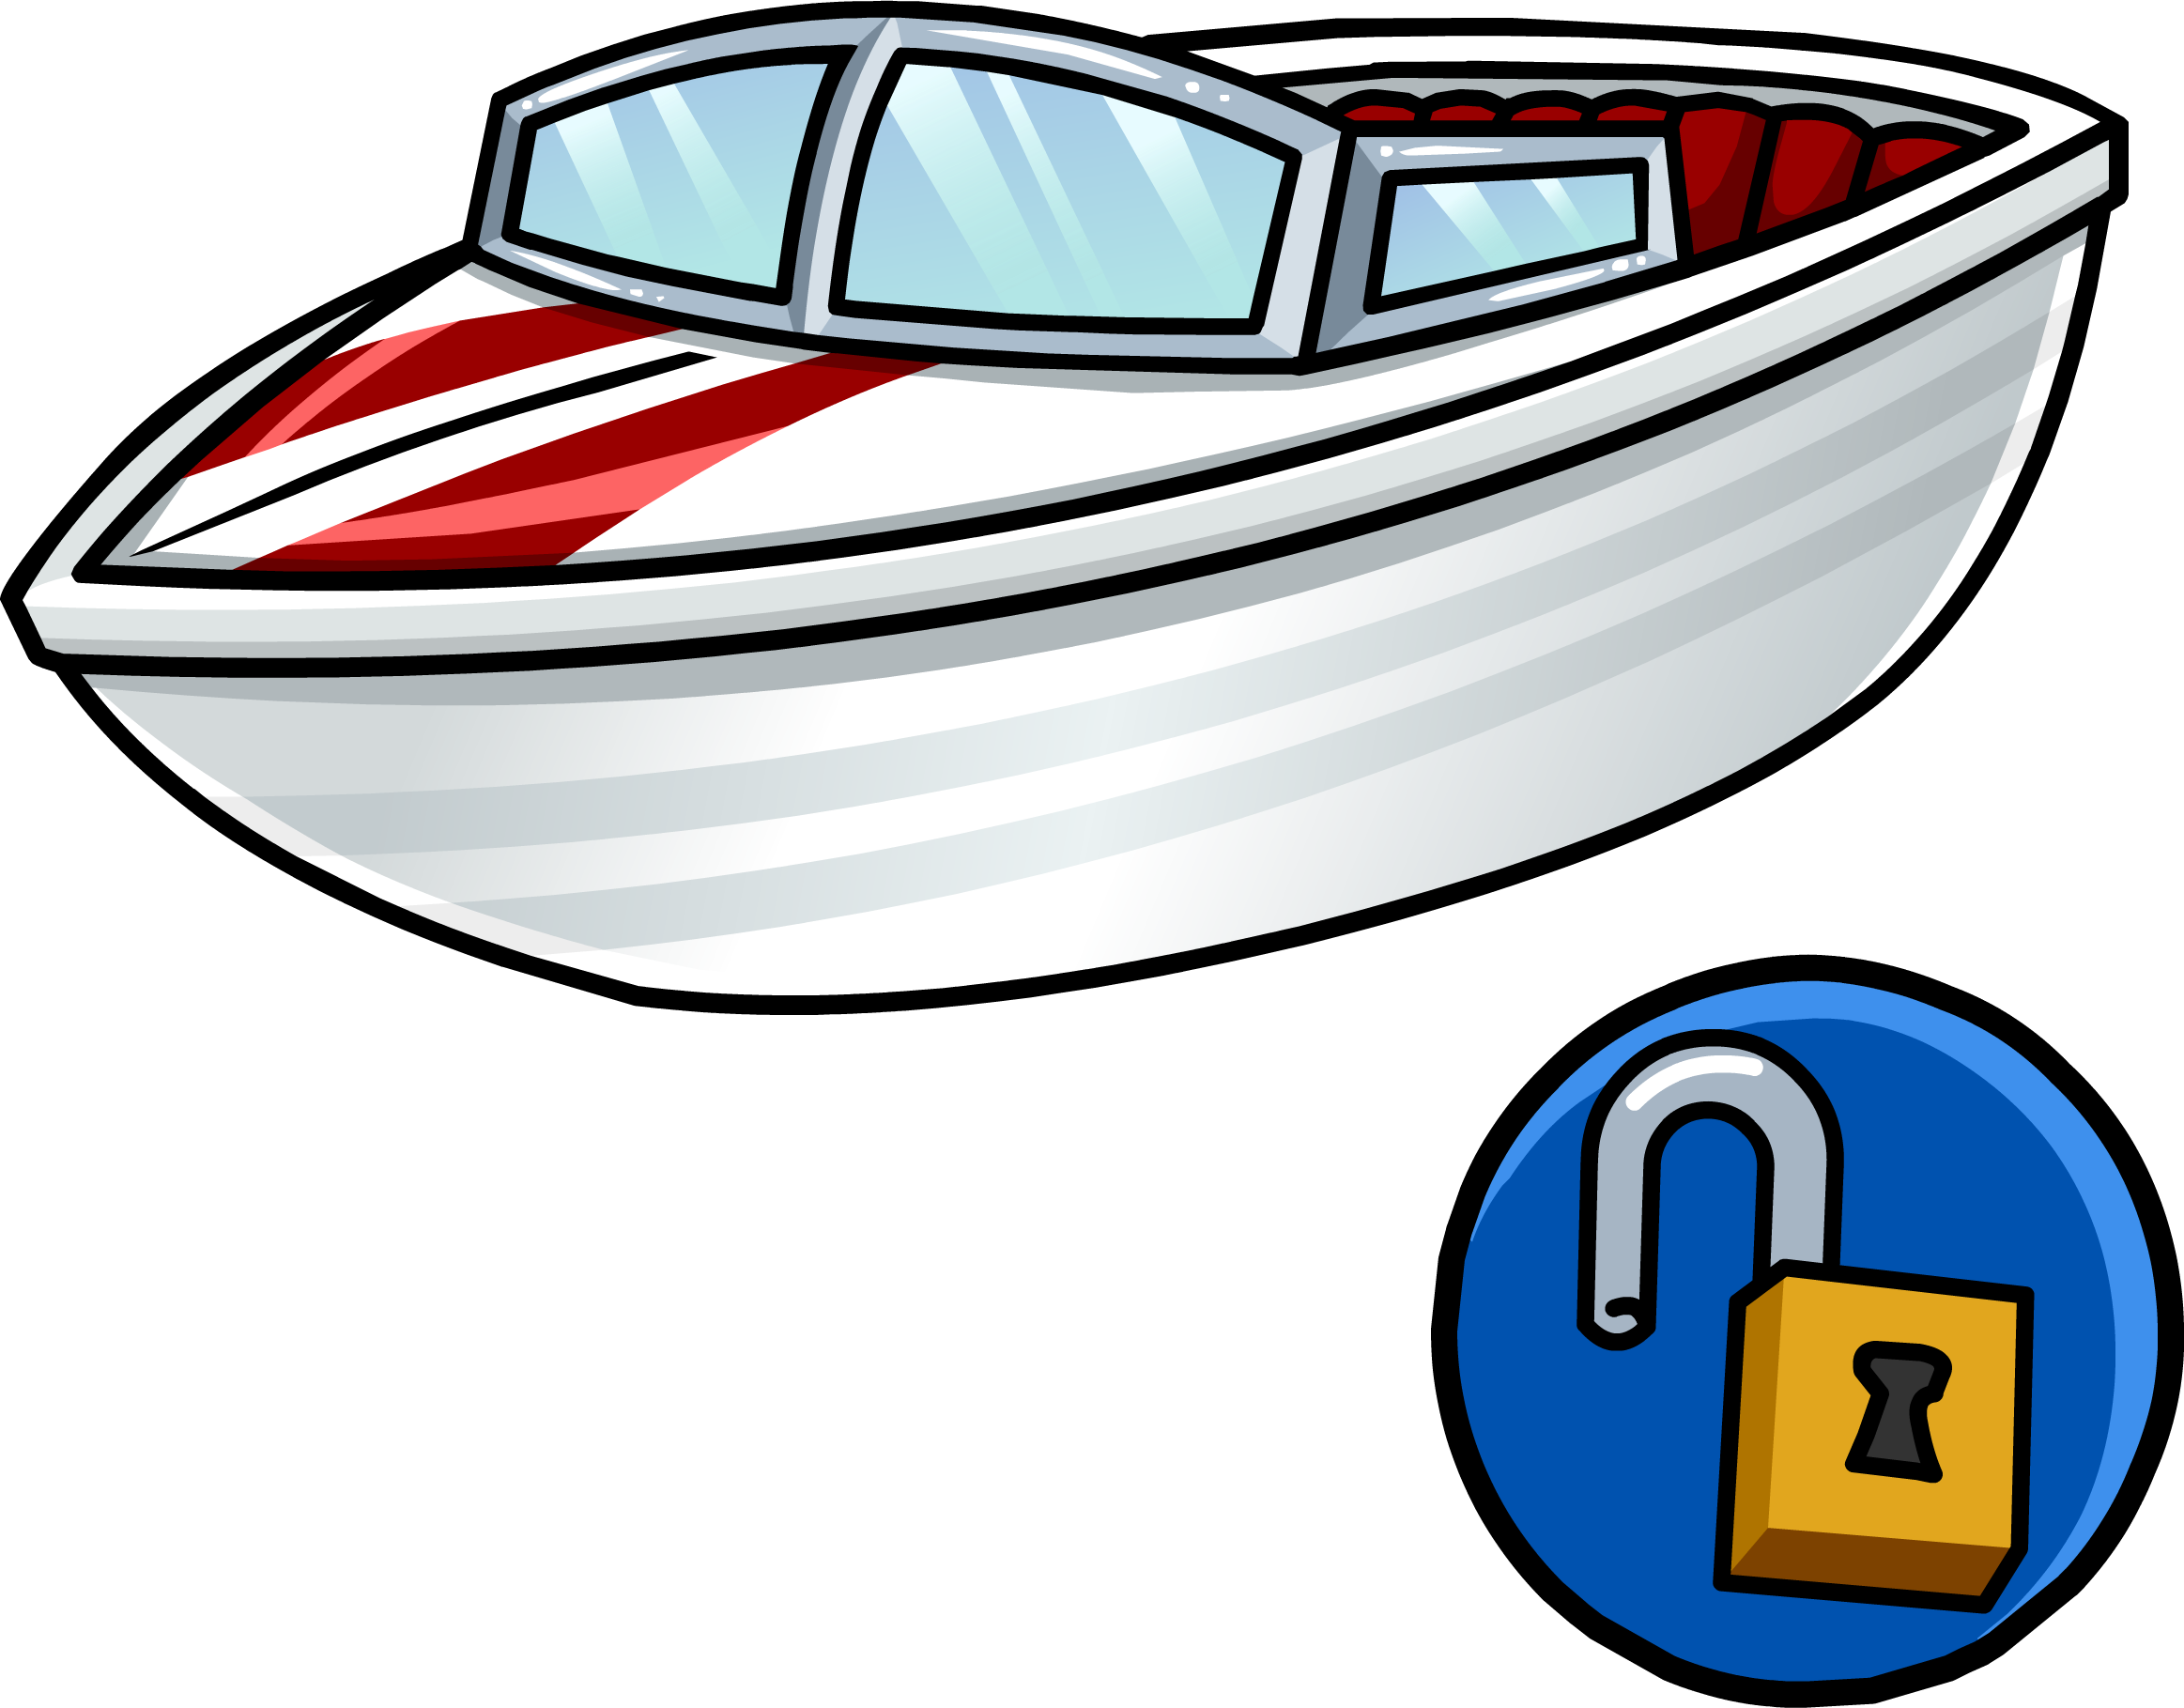 Png Image - Speed Boat Clip Art Png (2326x1819)